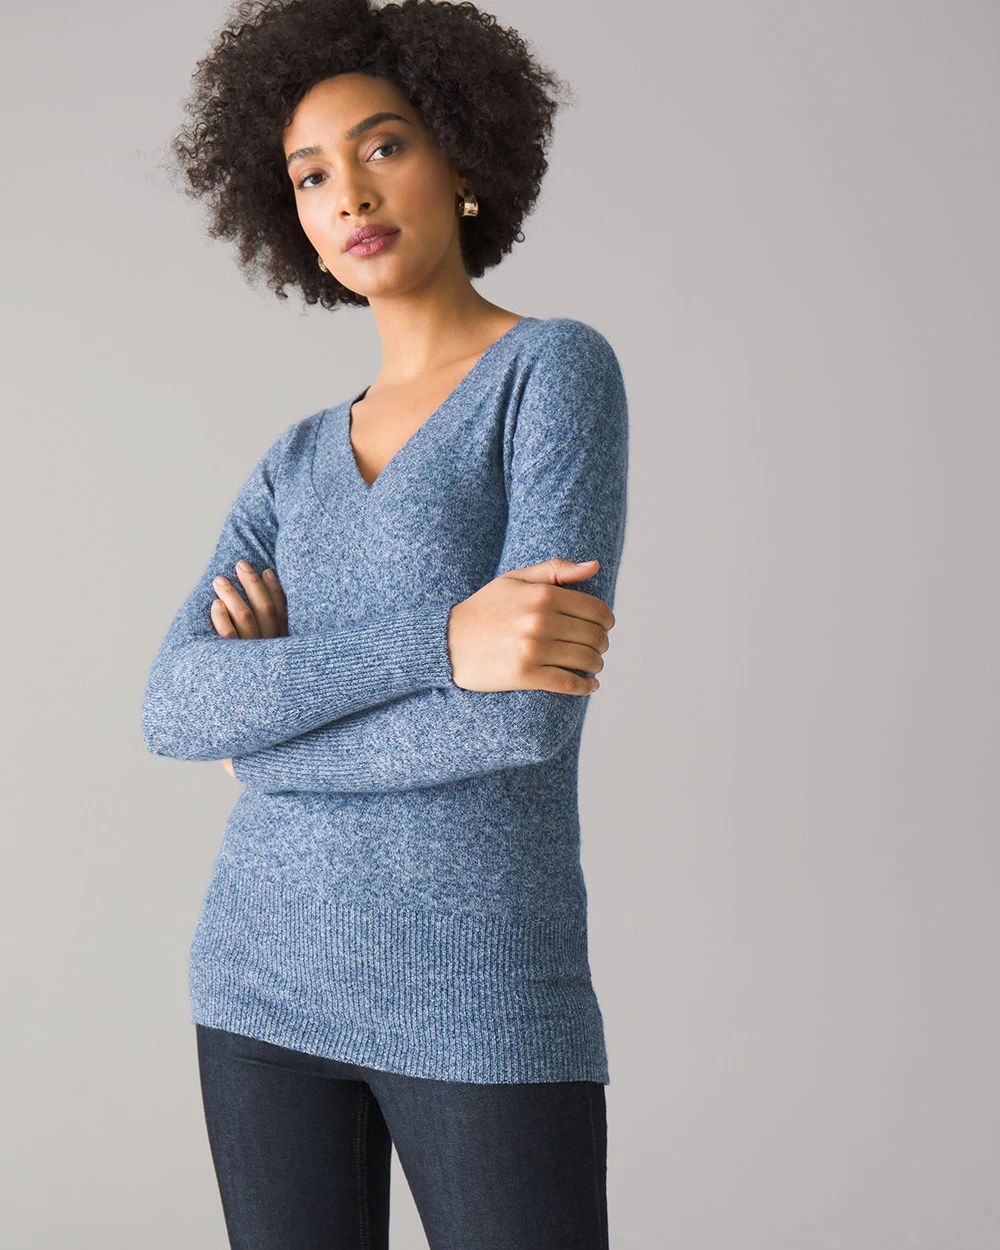 Petite Long-Sleeve Heathered Tunic click to view larger image.